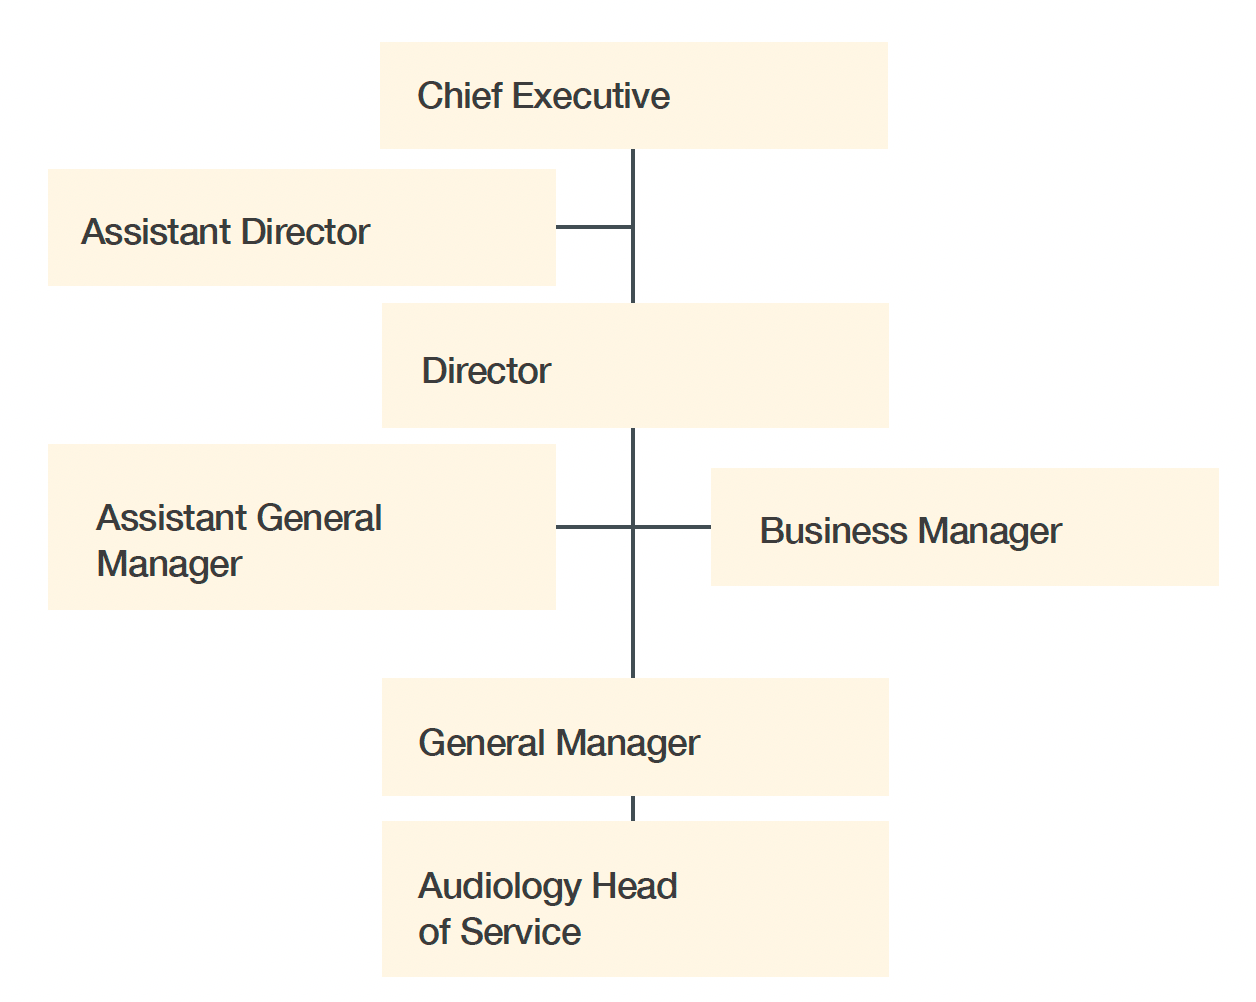 Image shows internal governance structure for audiology services within Health Boards.